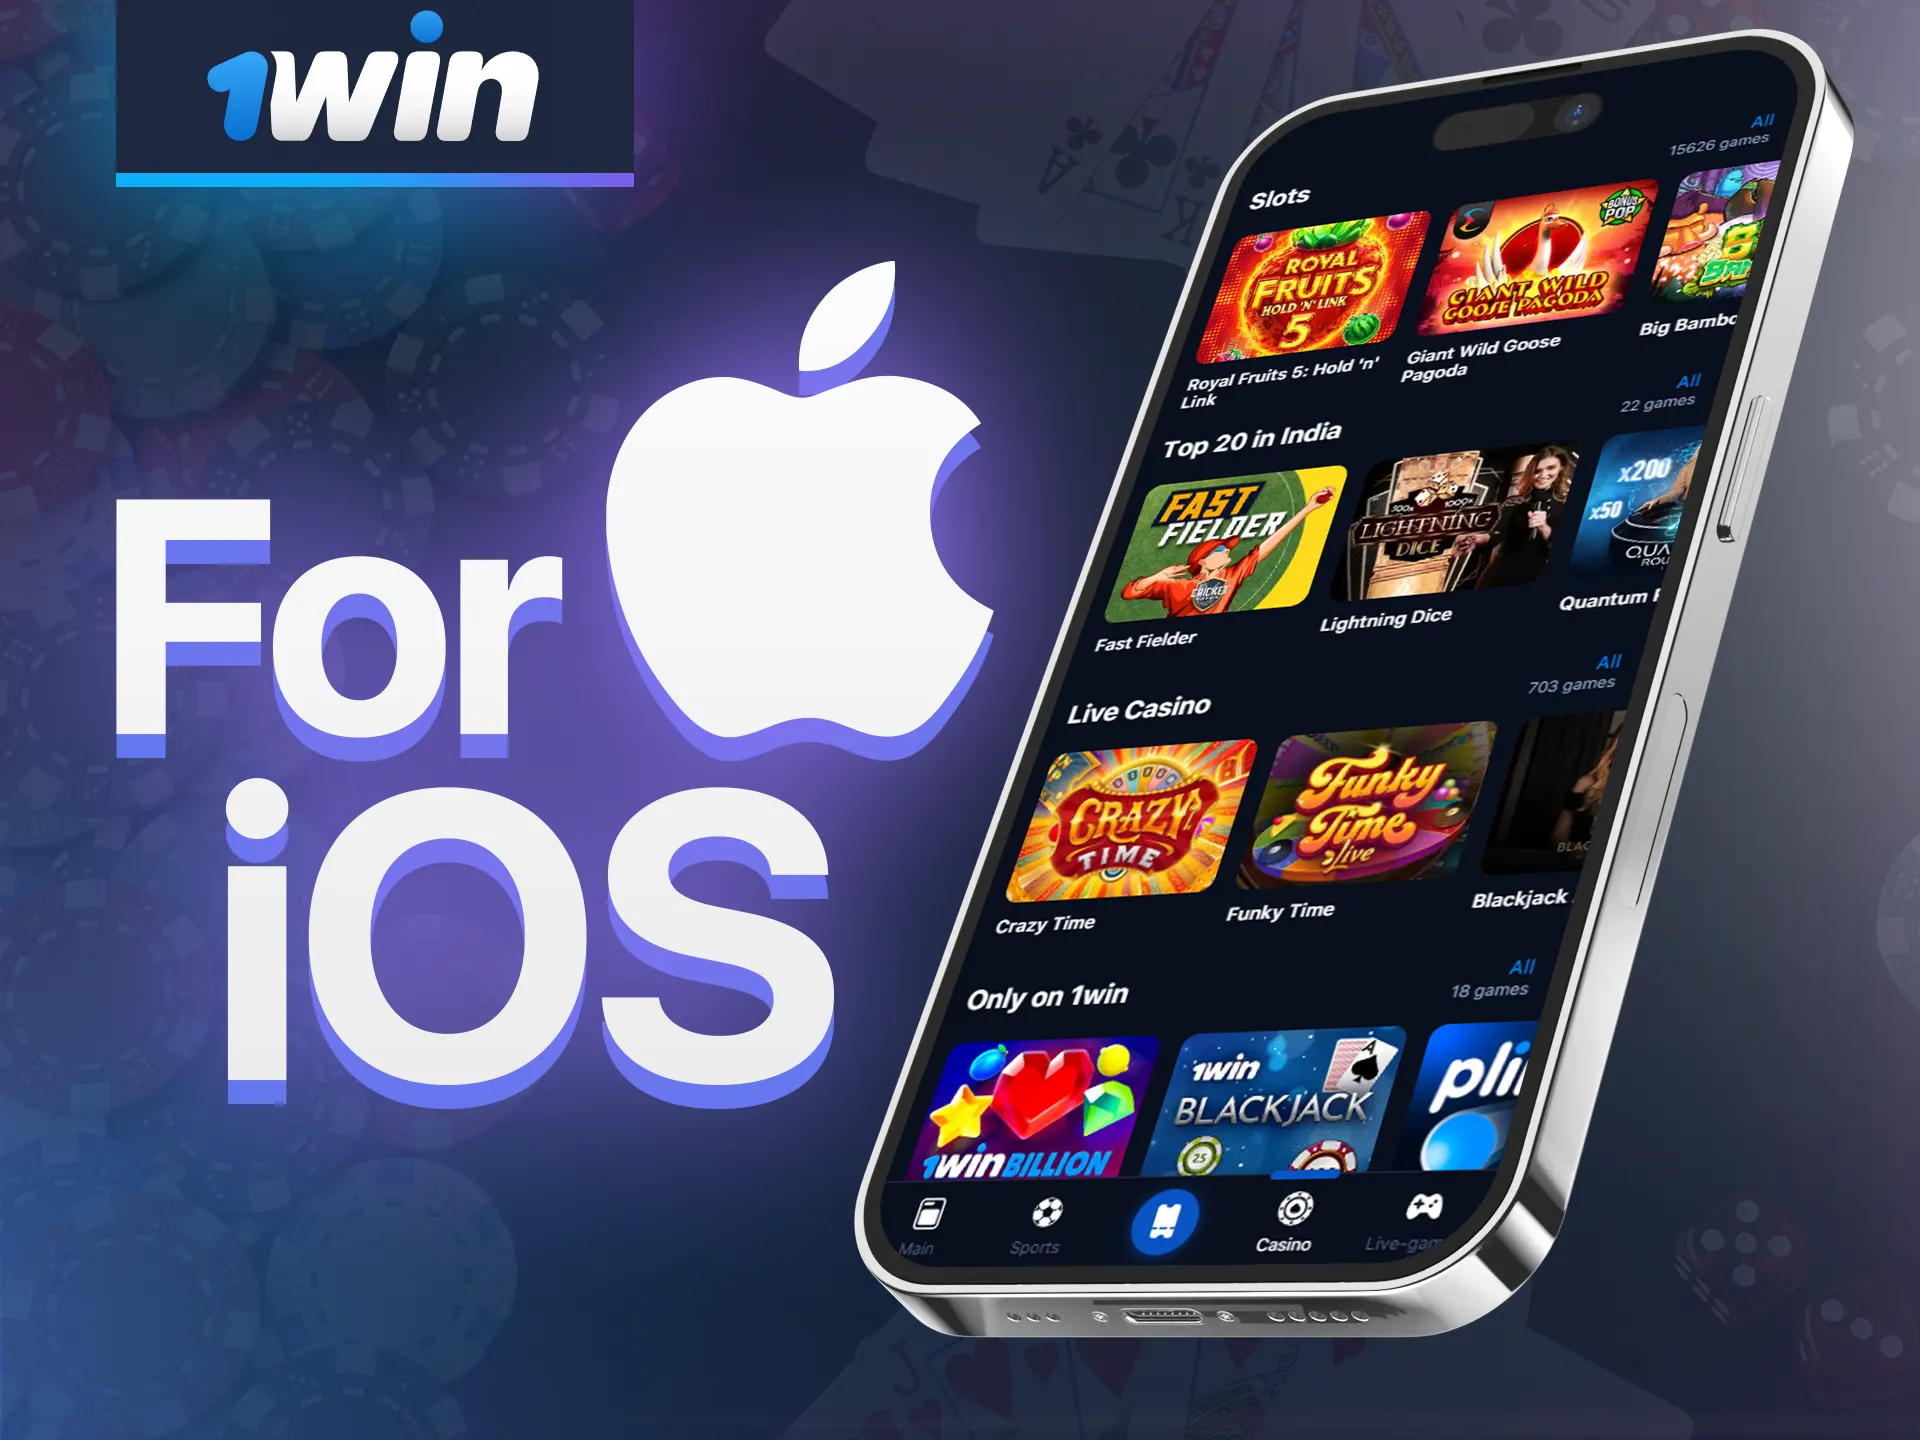 The 1win mobile app is compatible with iOS devices and users can download the software from the 1win website for free.